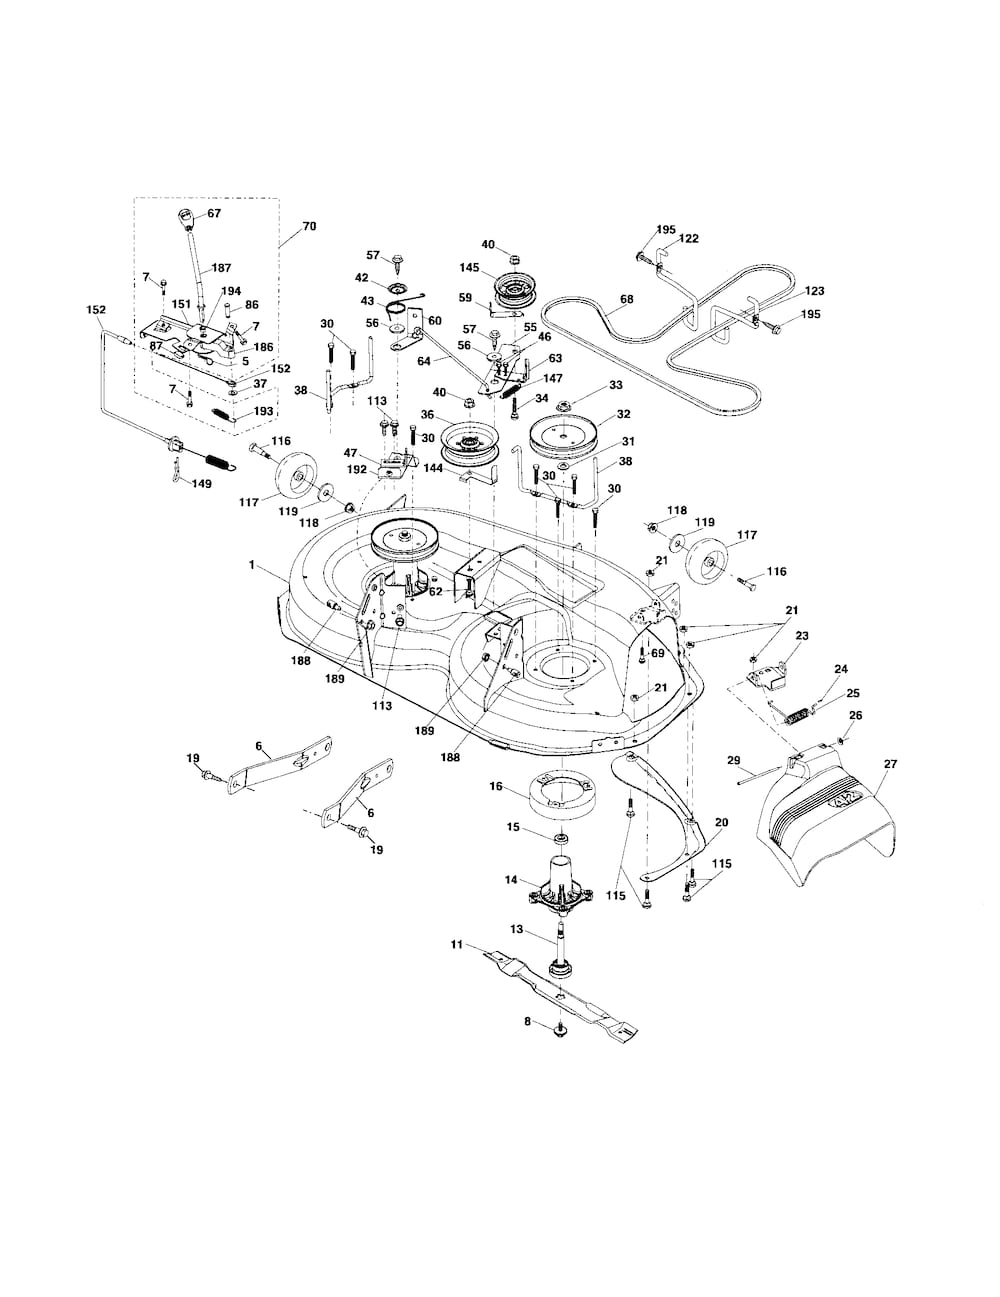 ... and Parts List for POULAN Riding-Mower-Tractor-Parts model # PB22H42YT